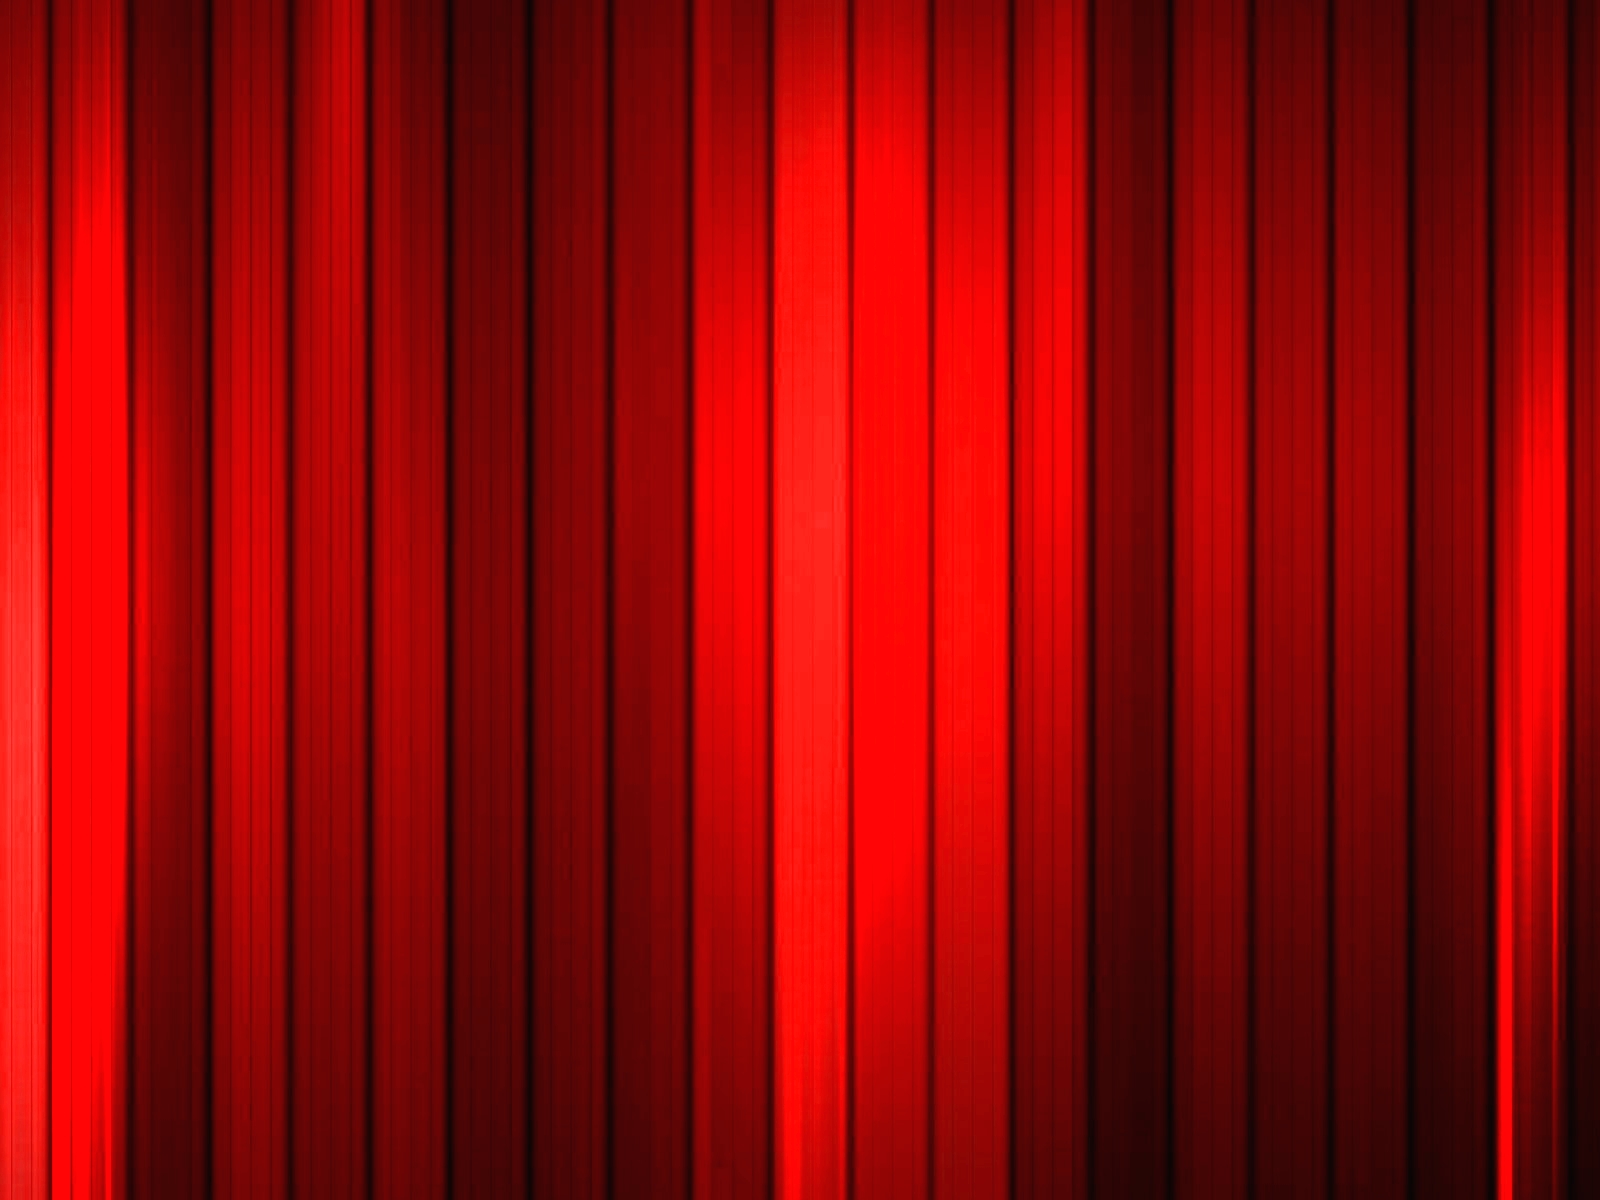 Red Hd Wallpaper / Download everpix cool wallpapers hd 4k and enjoy it